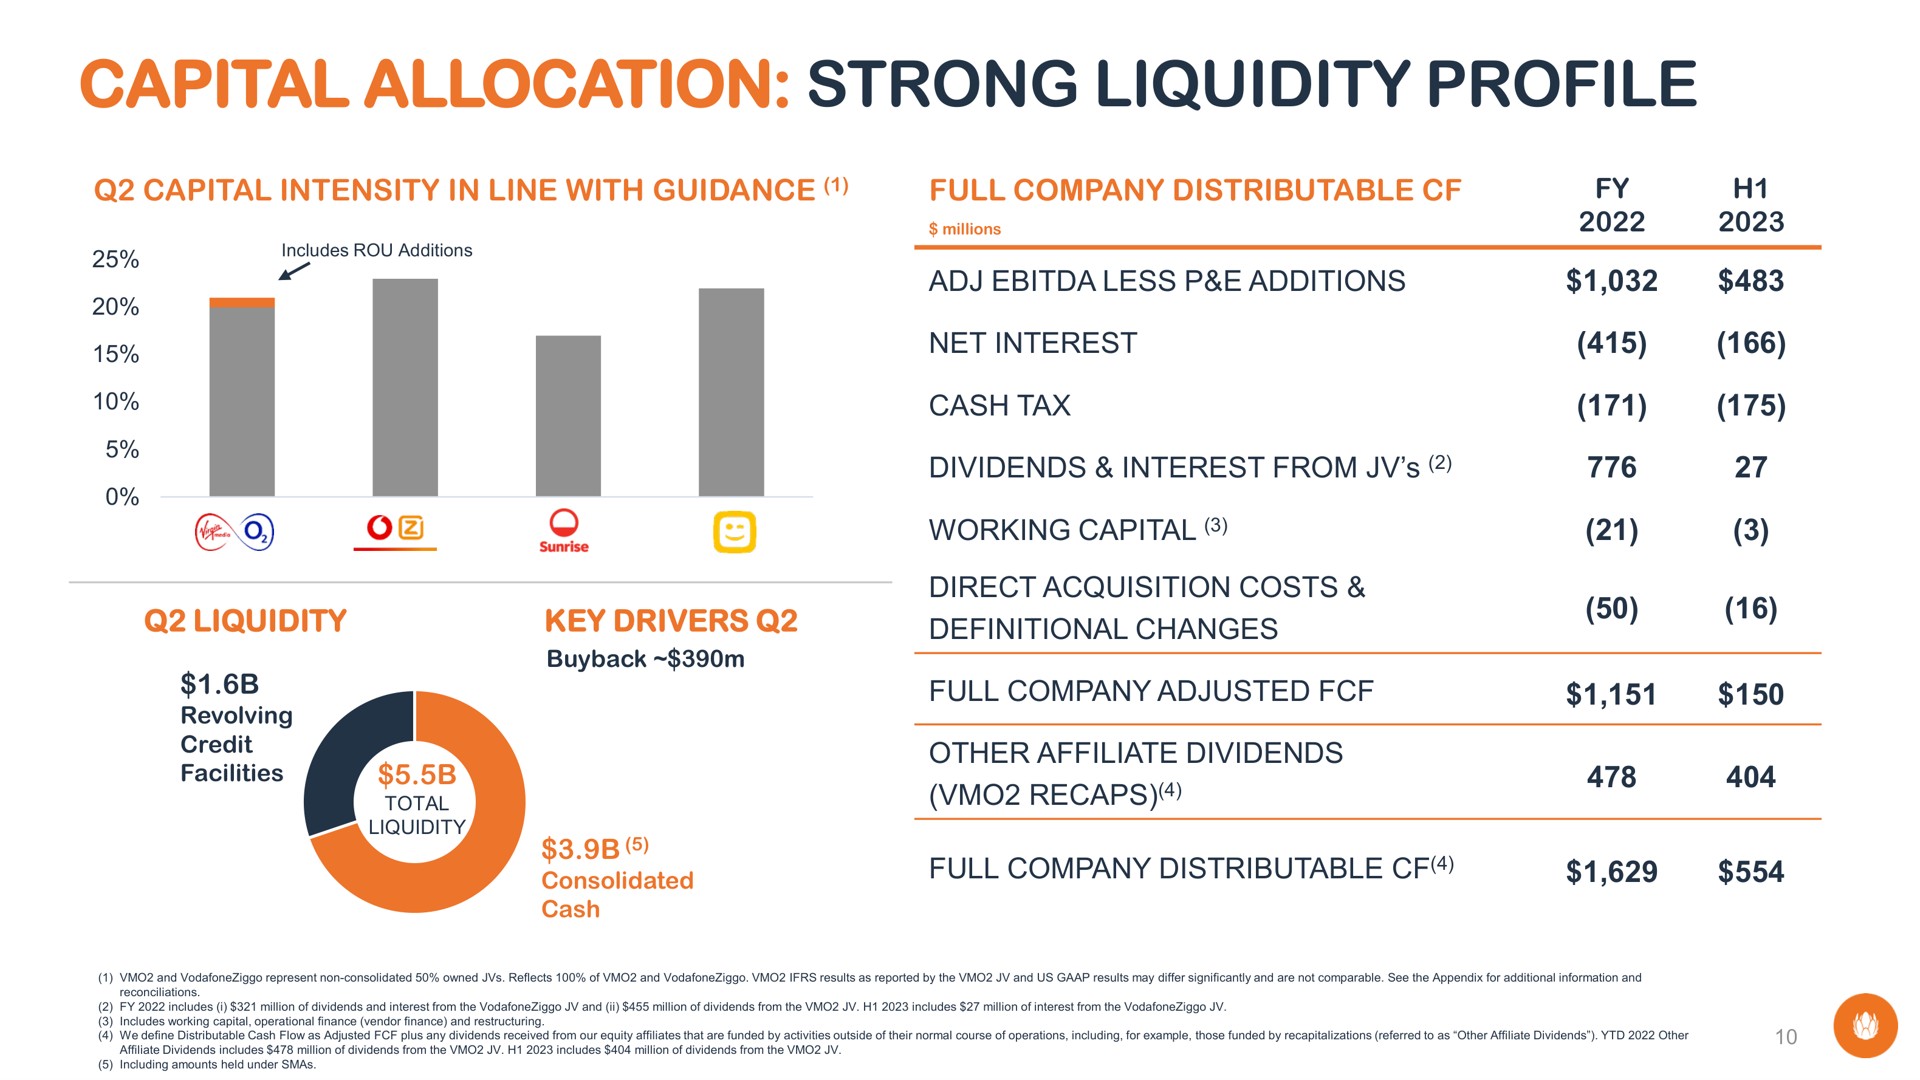 capital allocation strong liquidity profile of net interest cash tax dividends interest from working recaps ale | Liberty Global